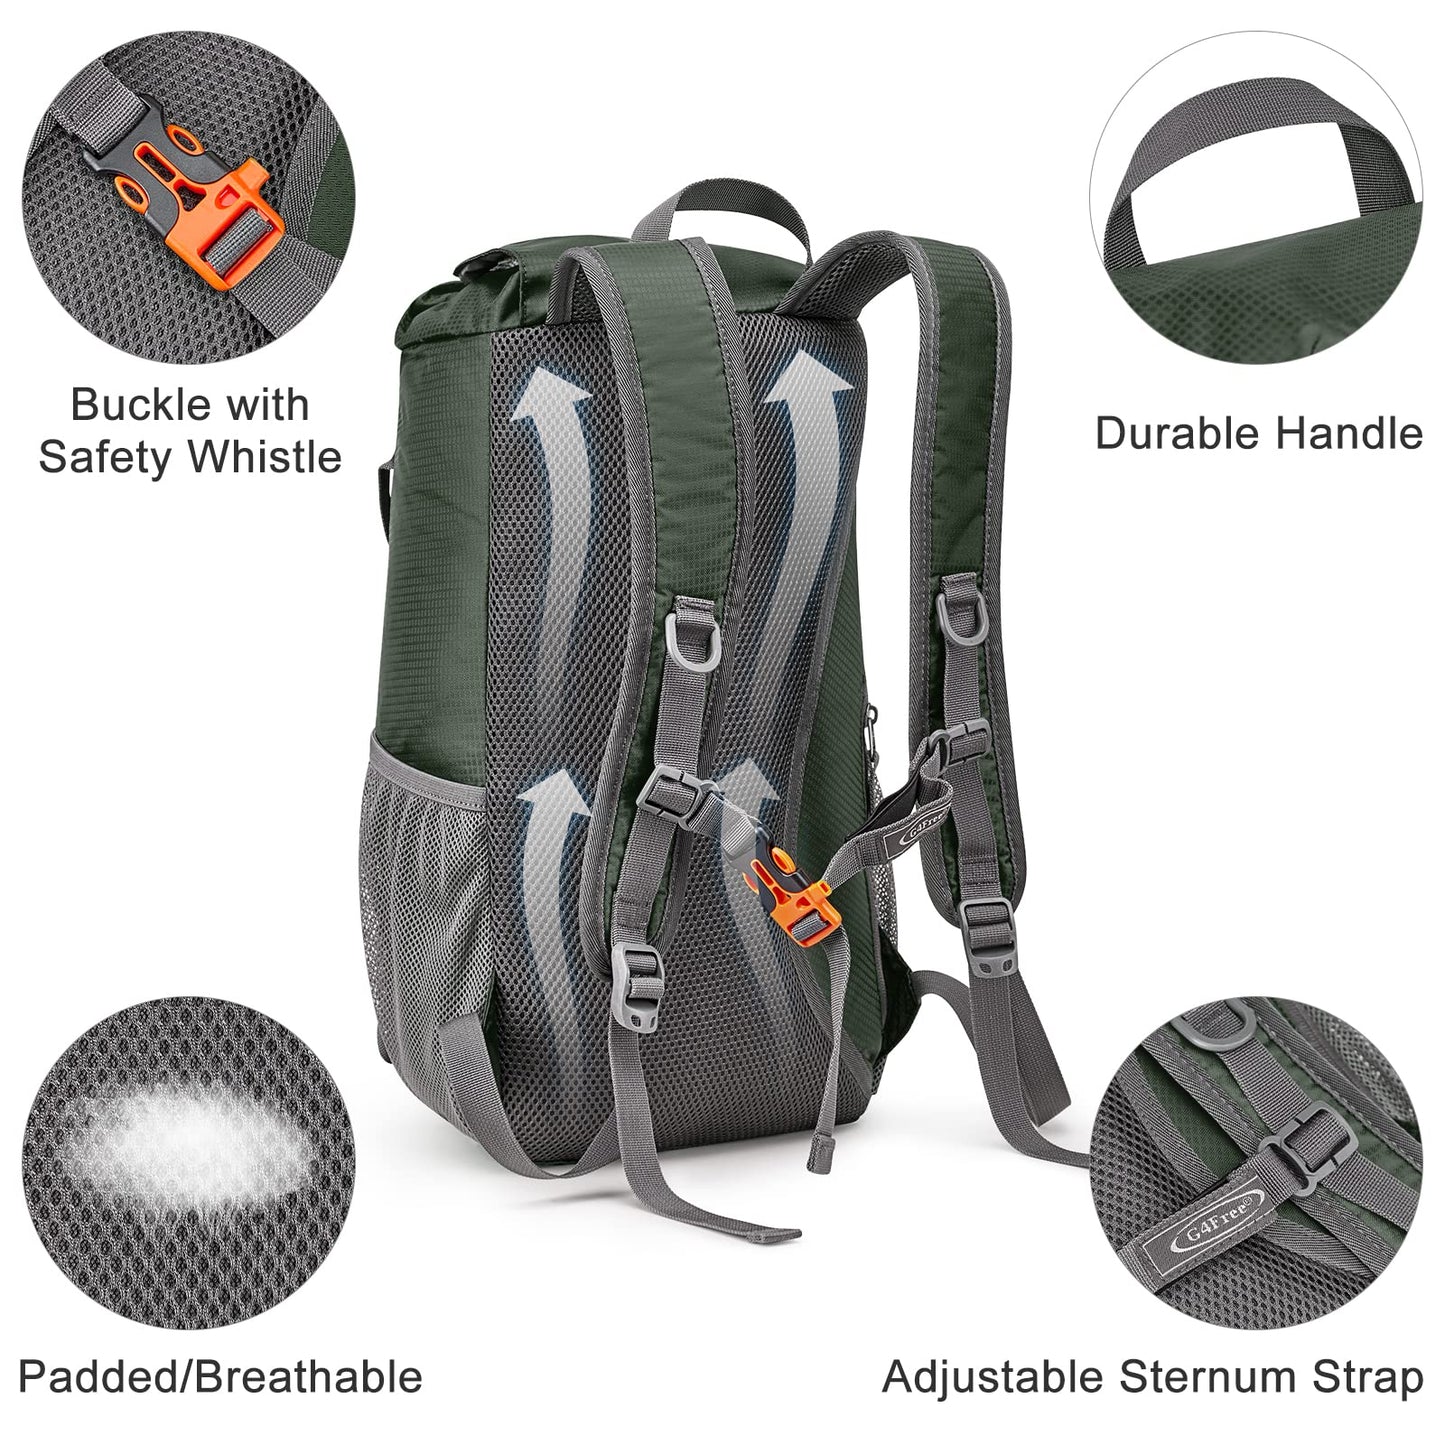 G4Free 15L Hiking Daypack Small Cinch Backpack